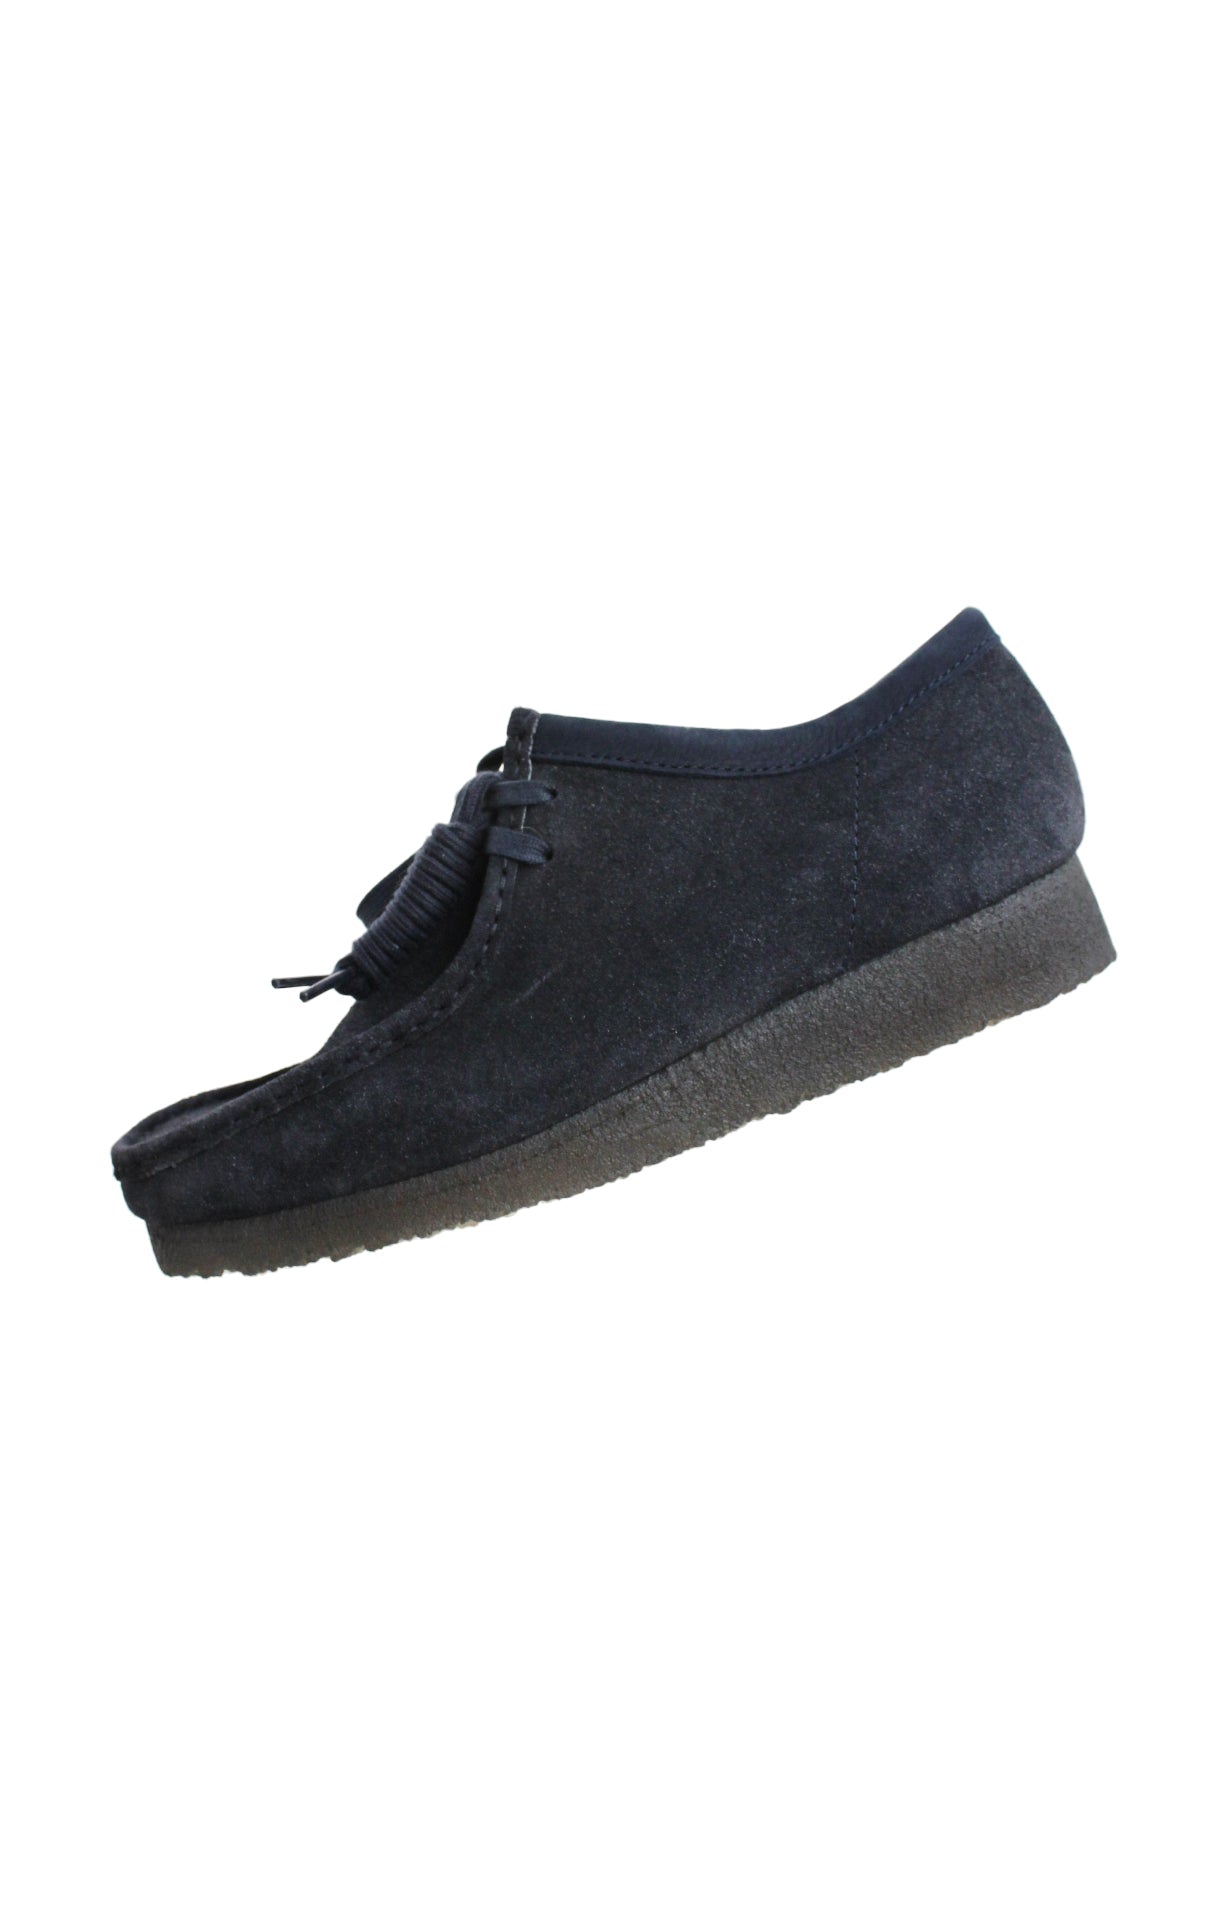 left side view of clarks originals ink navy suede wallabee shoes. features top flat lace closure and crepe sole.